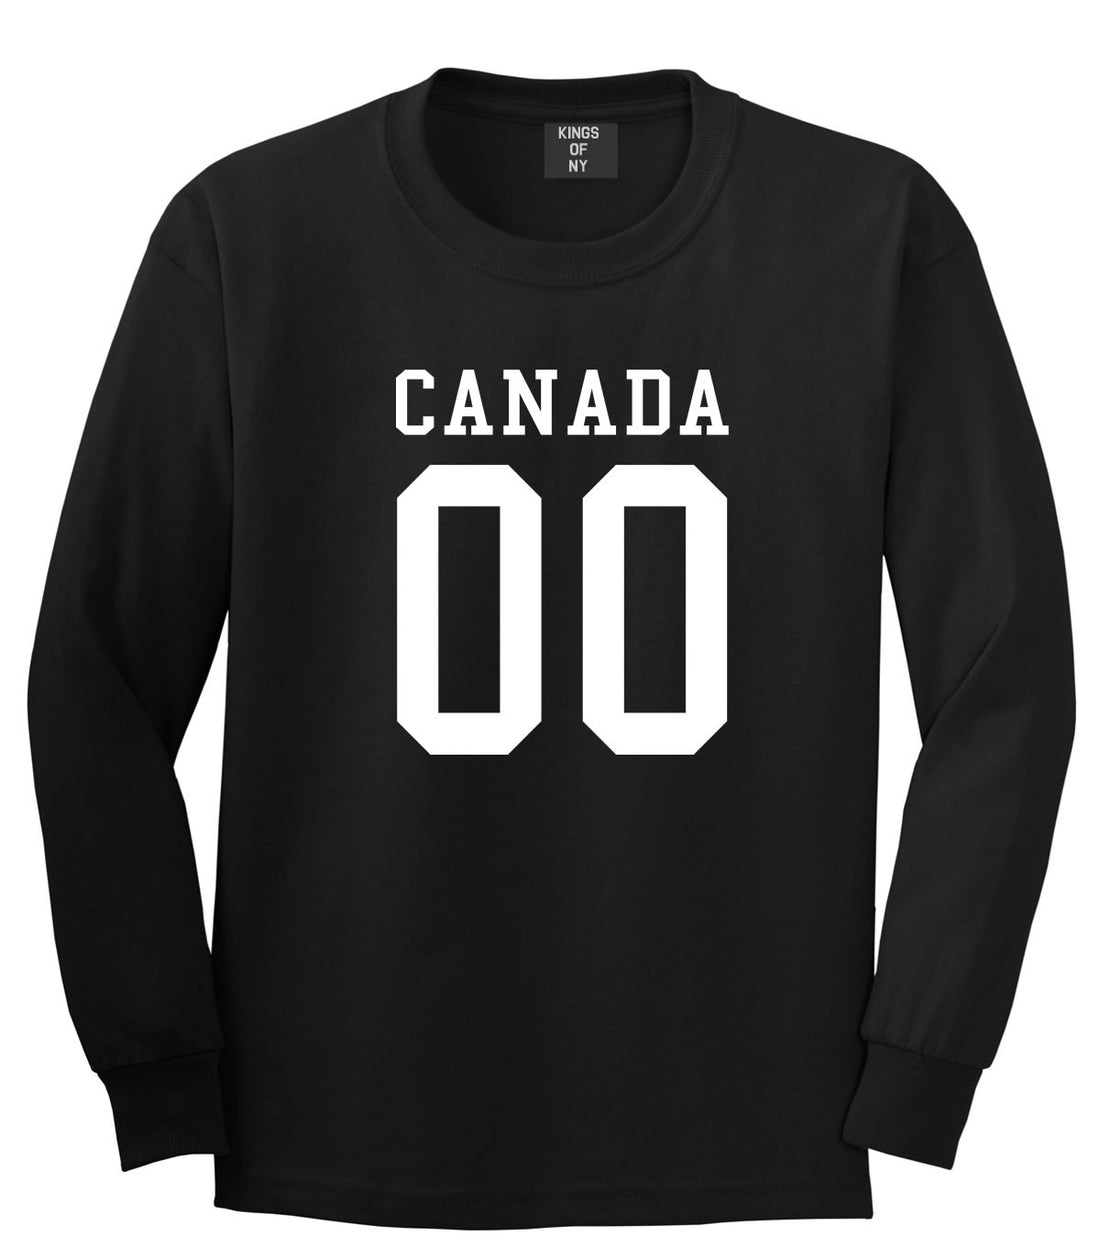 Canada Team 00 Jersey Long Sleeve T-Shirt in Black By Kings Of NY